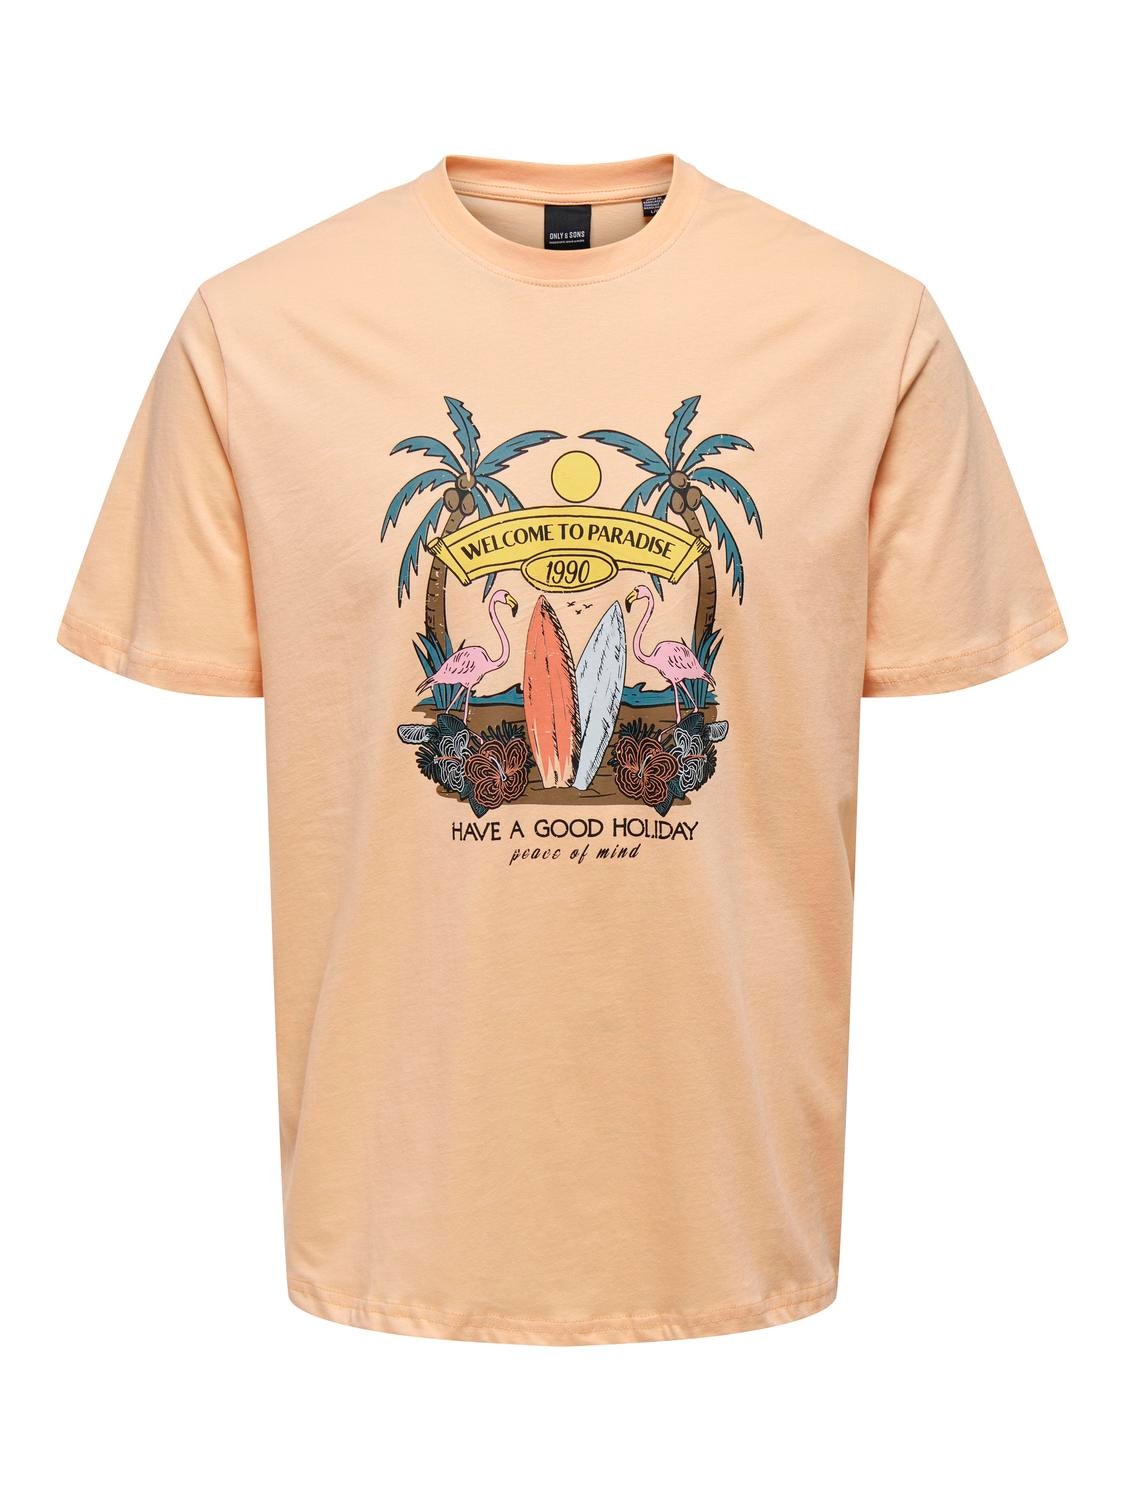 ONLY & SONS O-hals t-shirt med print -Peach Nectar - 22026084